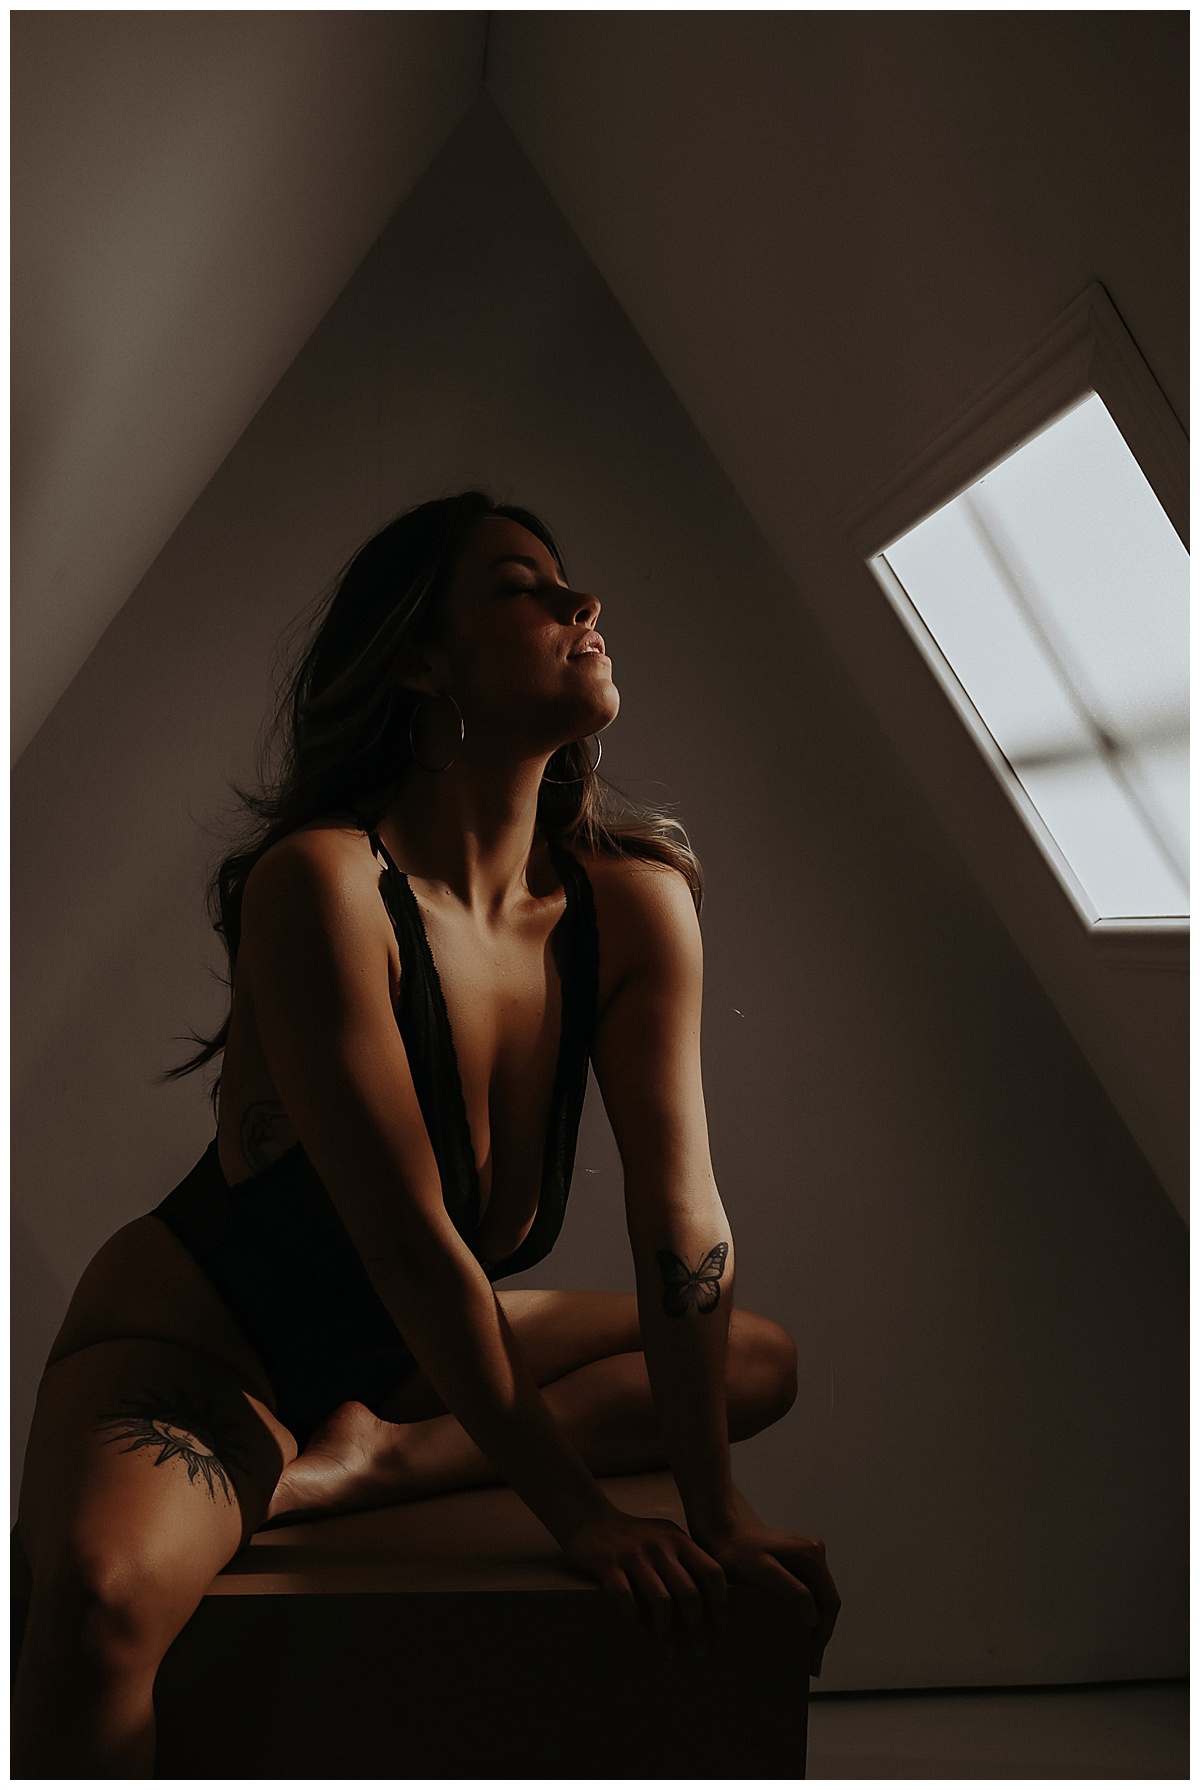 Person leans into light on box in lingerie for Sultry Skylight Session